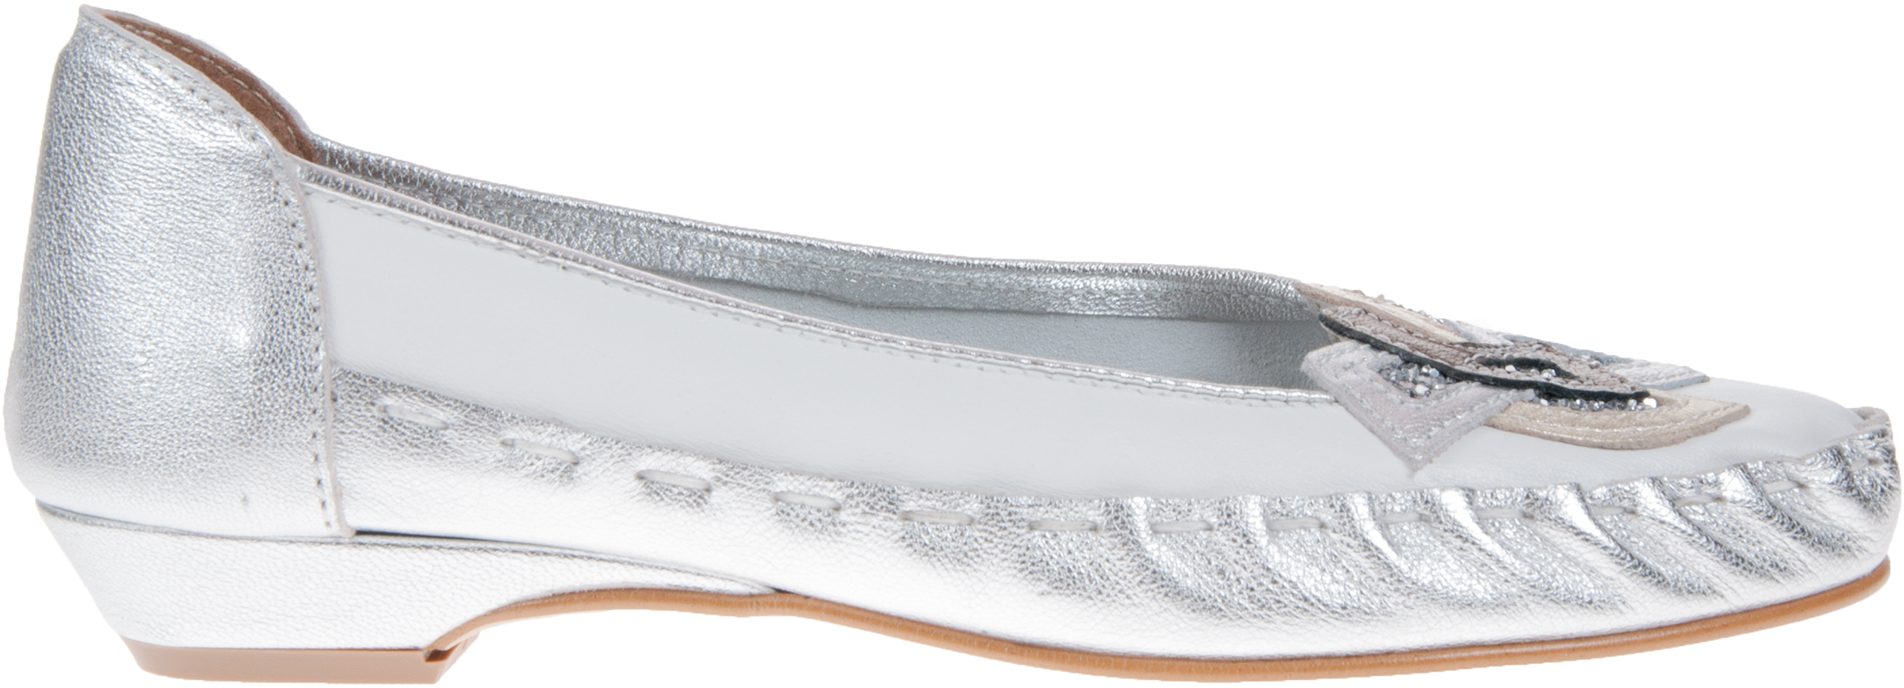 Zaccho 4569 Silver / White 4569 - Ballerina Shoes - Humphries Shoes